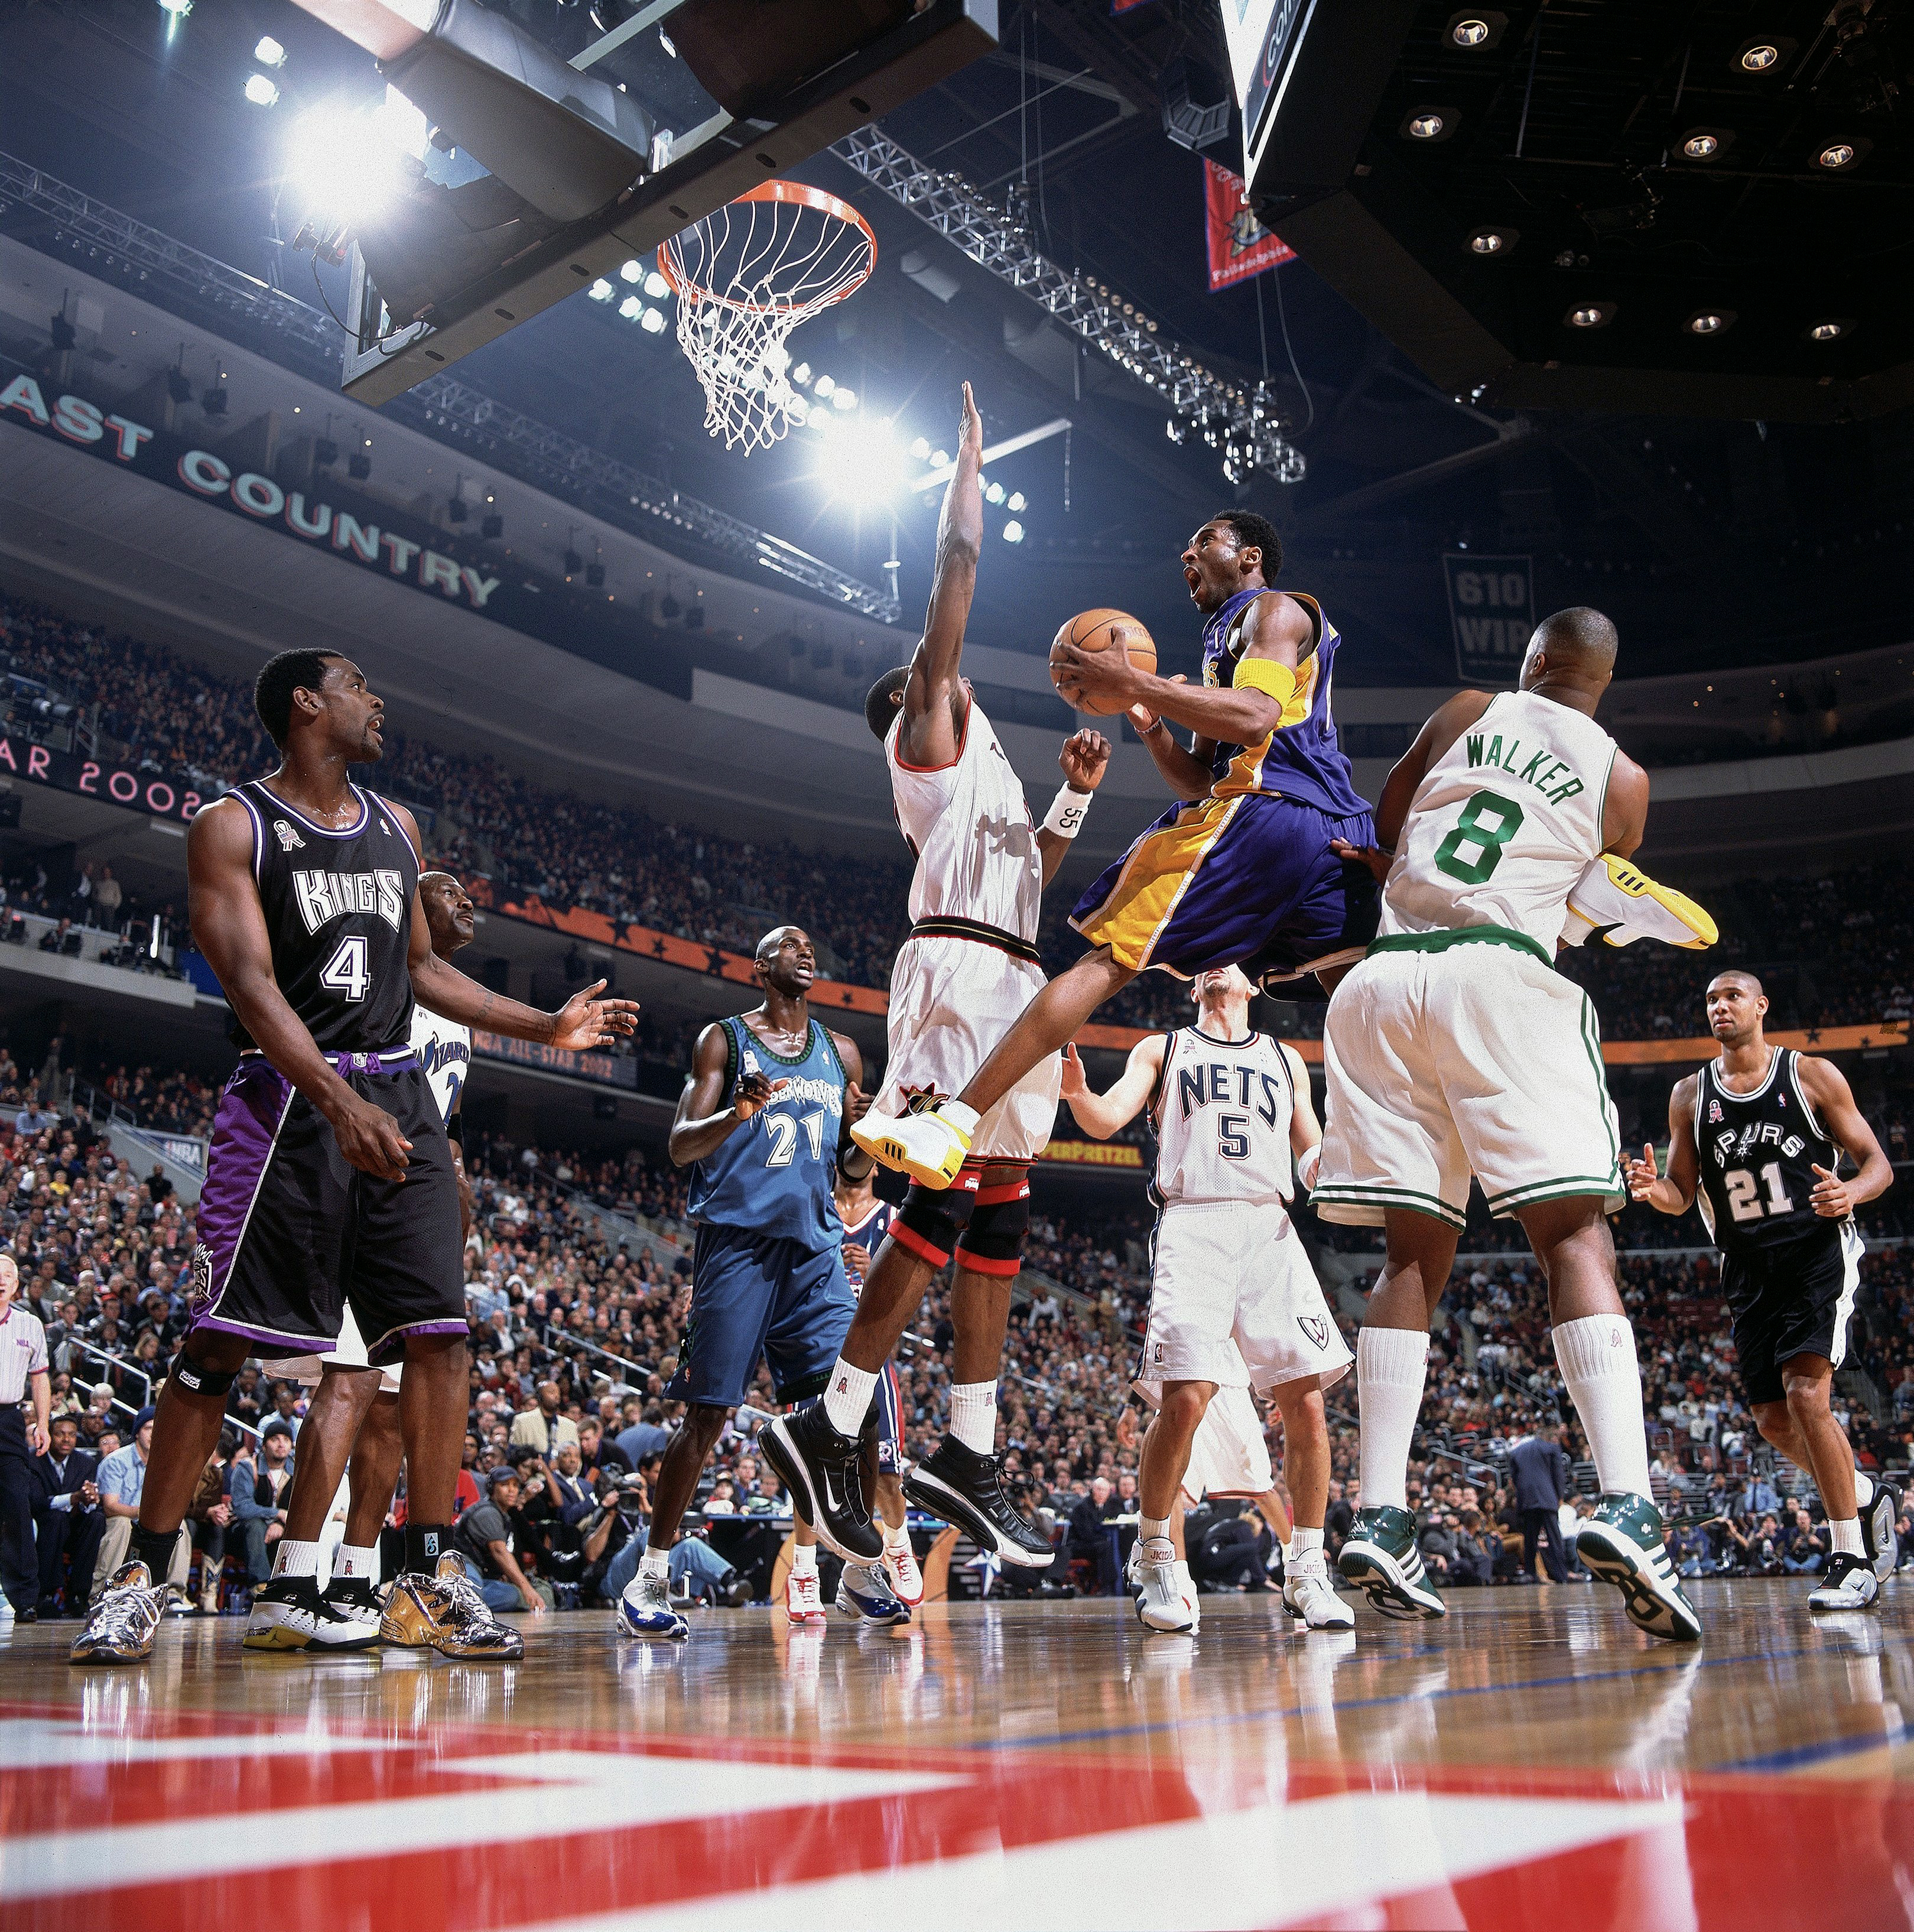 Los Angeles Lakers' Kobe Bryant in action during the NBA All-Star basketball game in Philadelphia on Feb. 9, 2002.